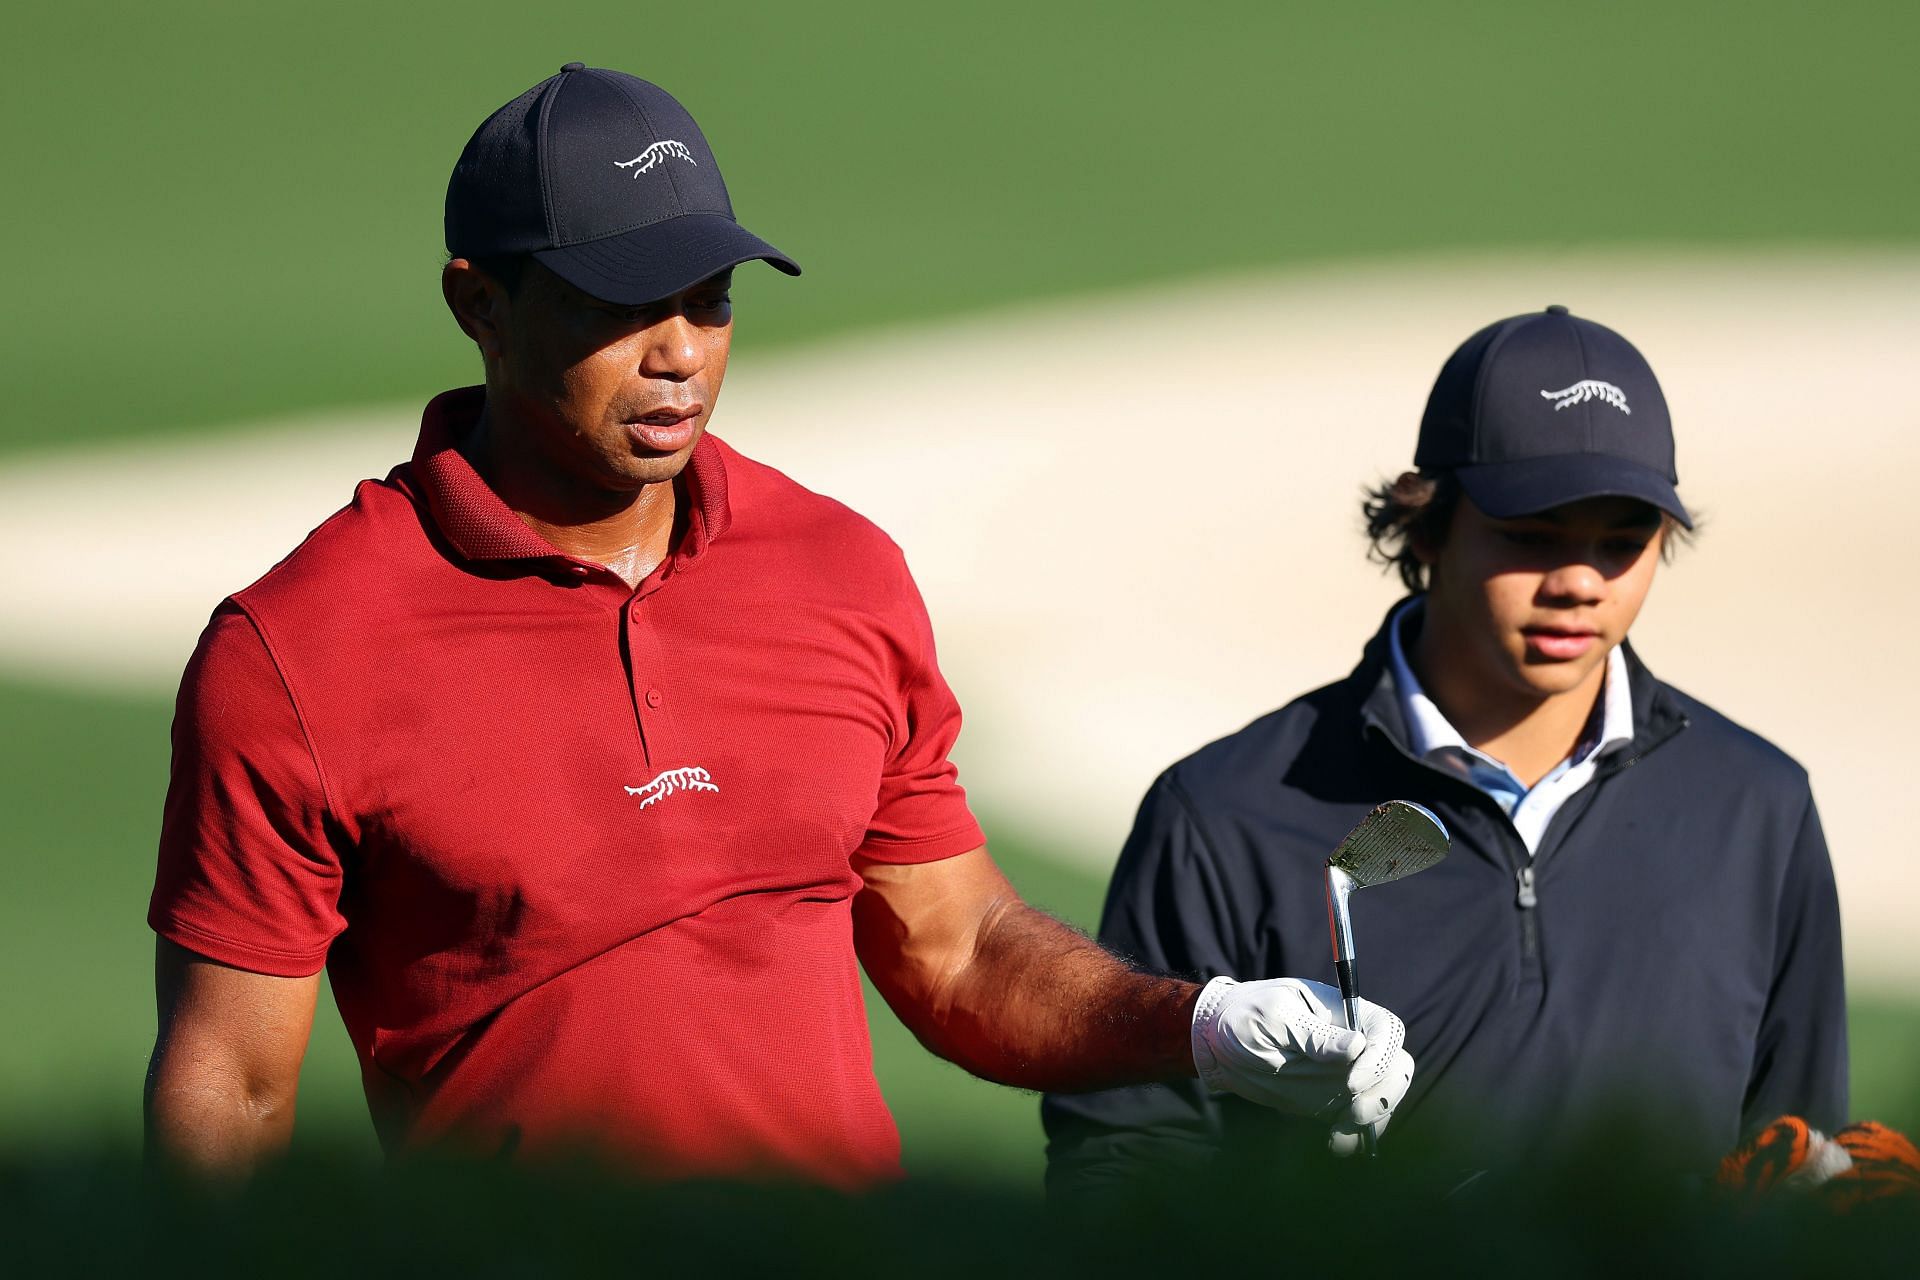 Tiger Woods and Charlie Woods at the Masters